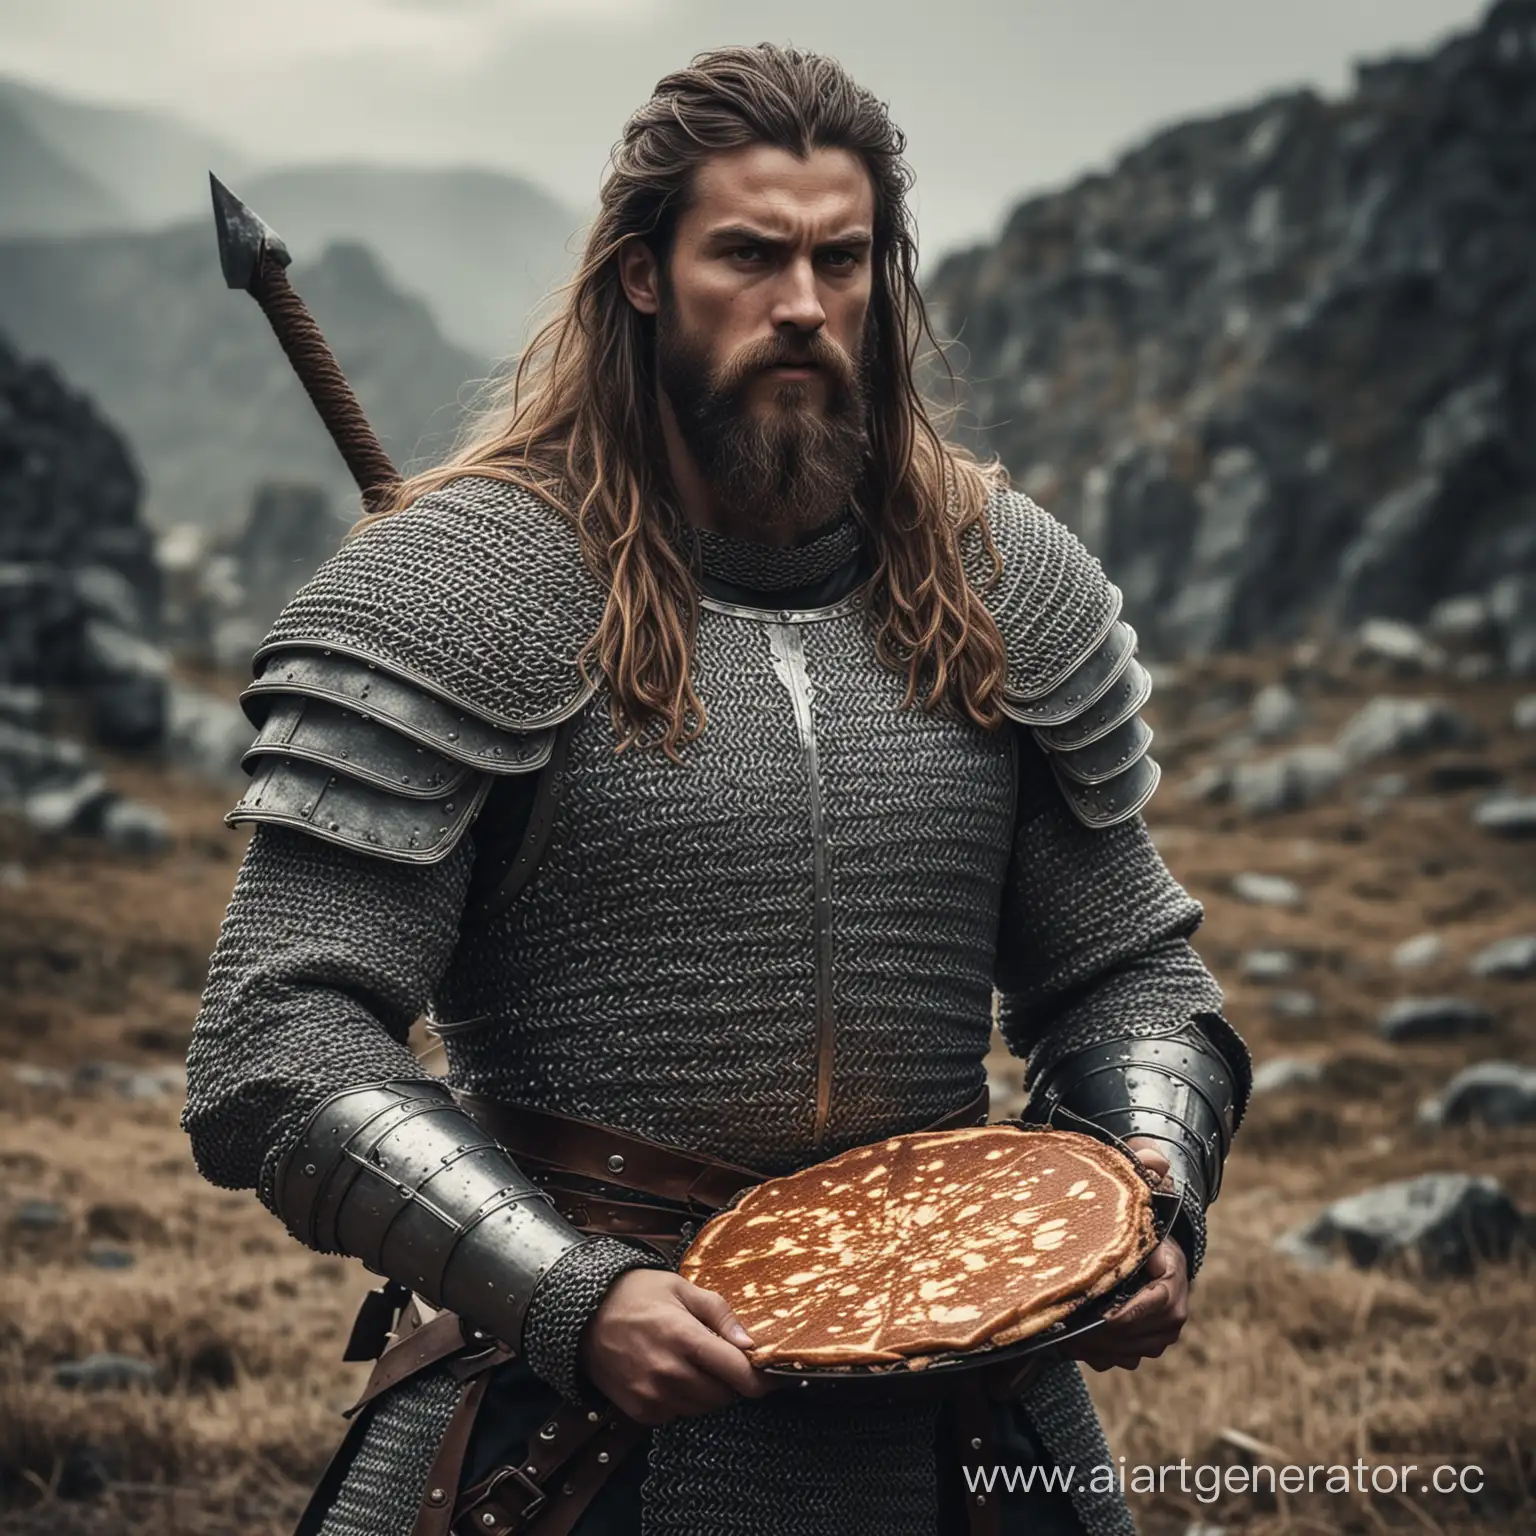 Powerful-Warrior-with-Long-Hair-and-Pancake-Beard-in-Fantasy-Chainmail